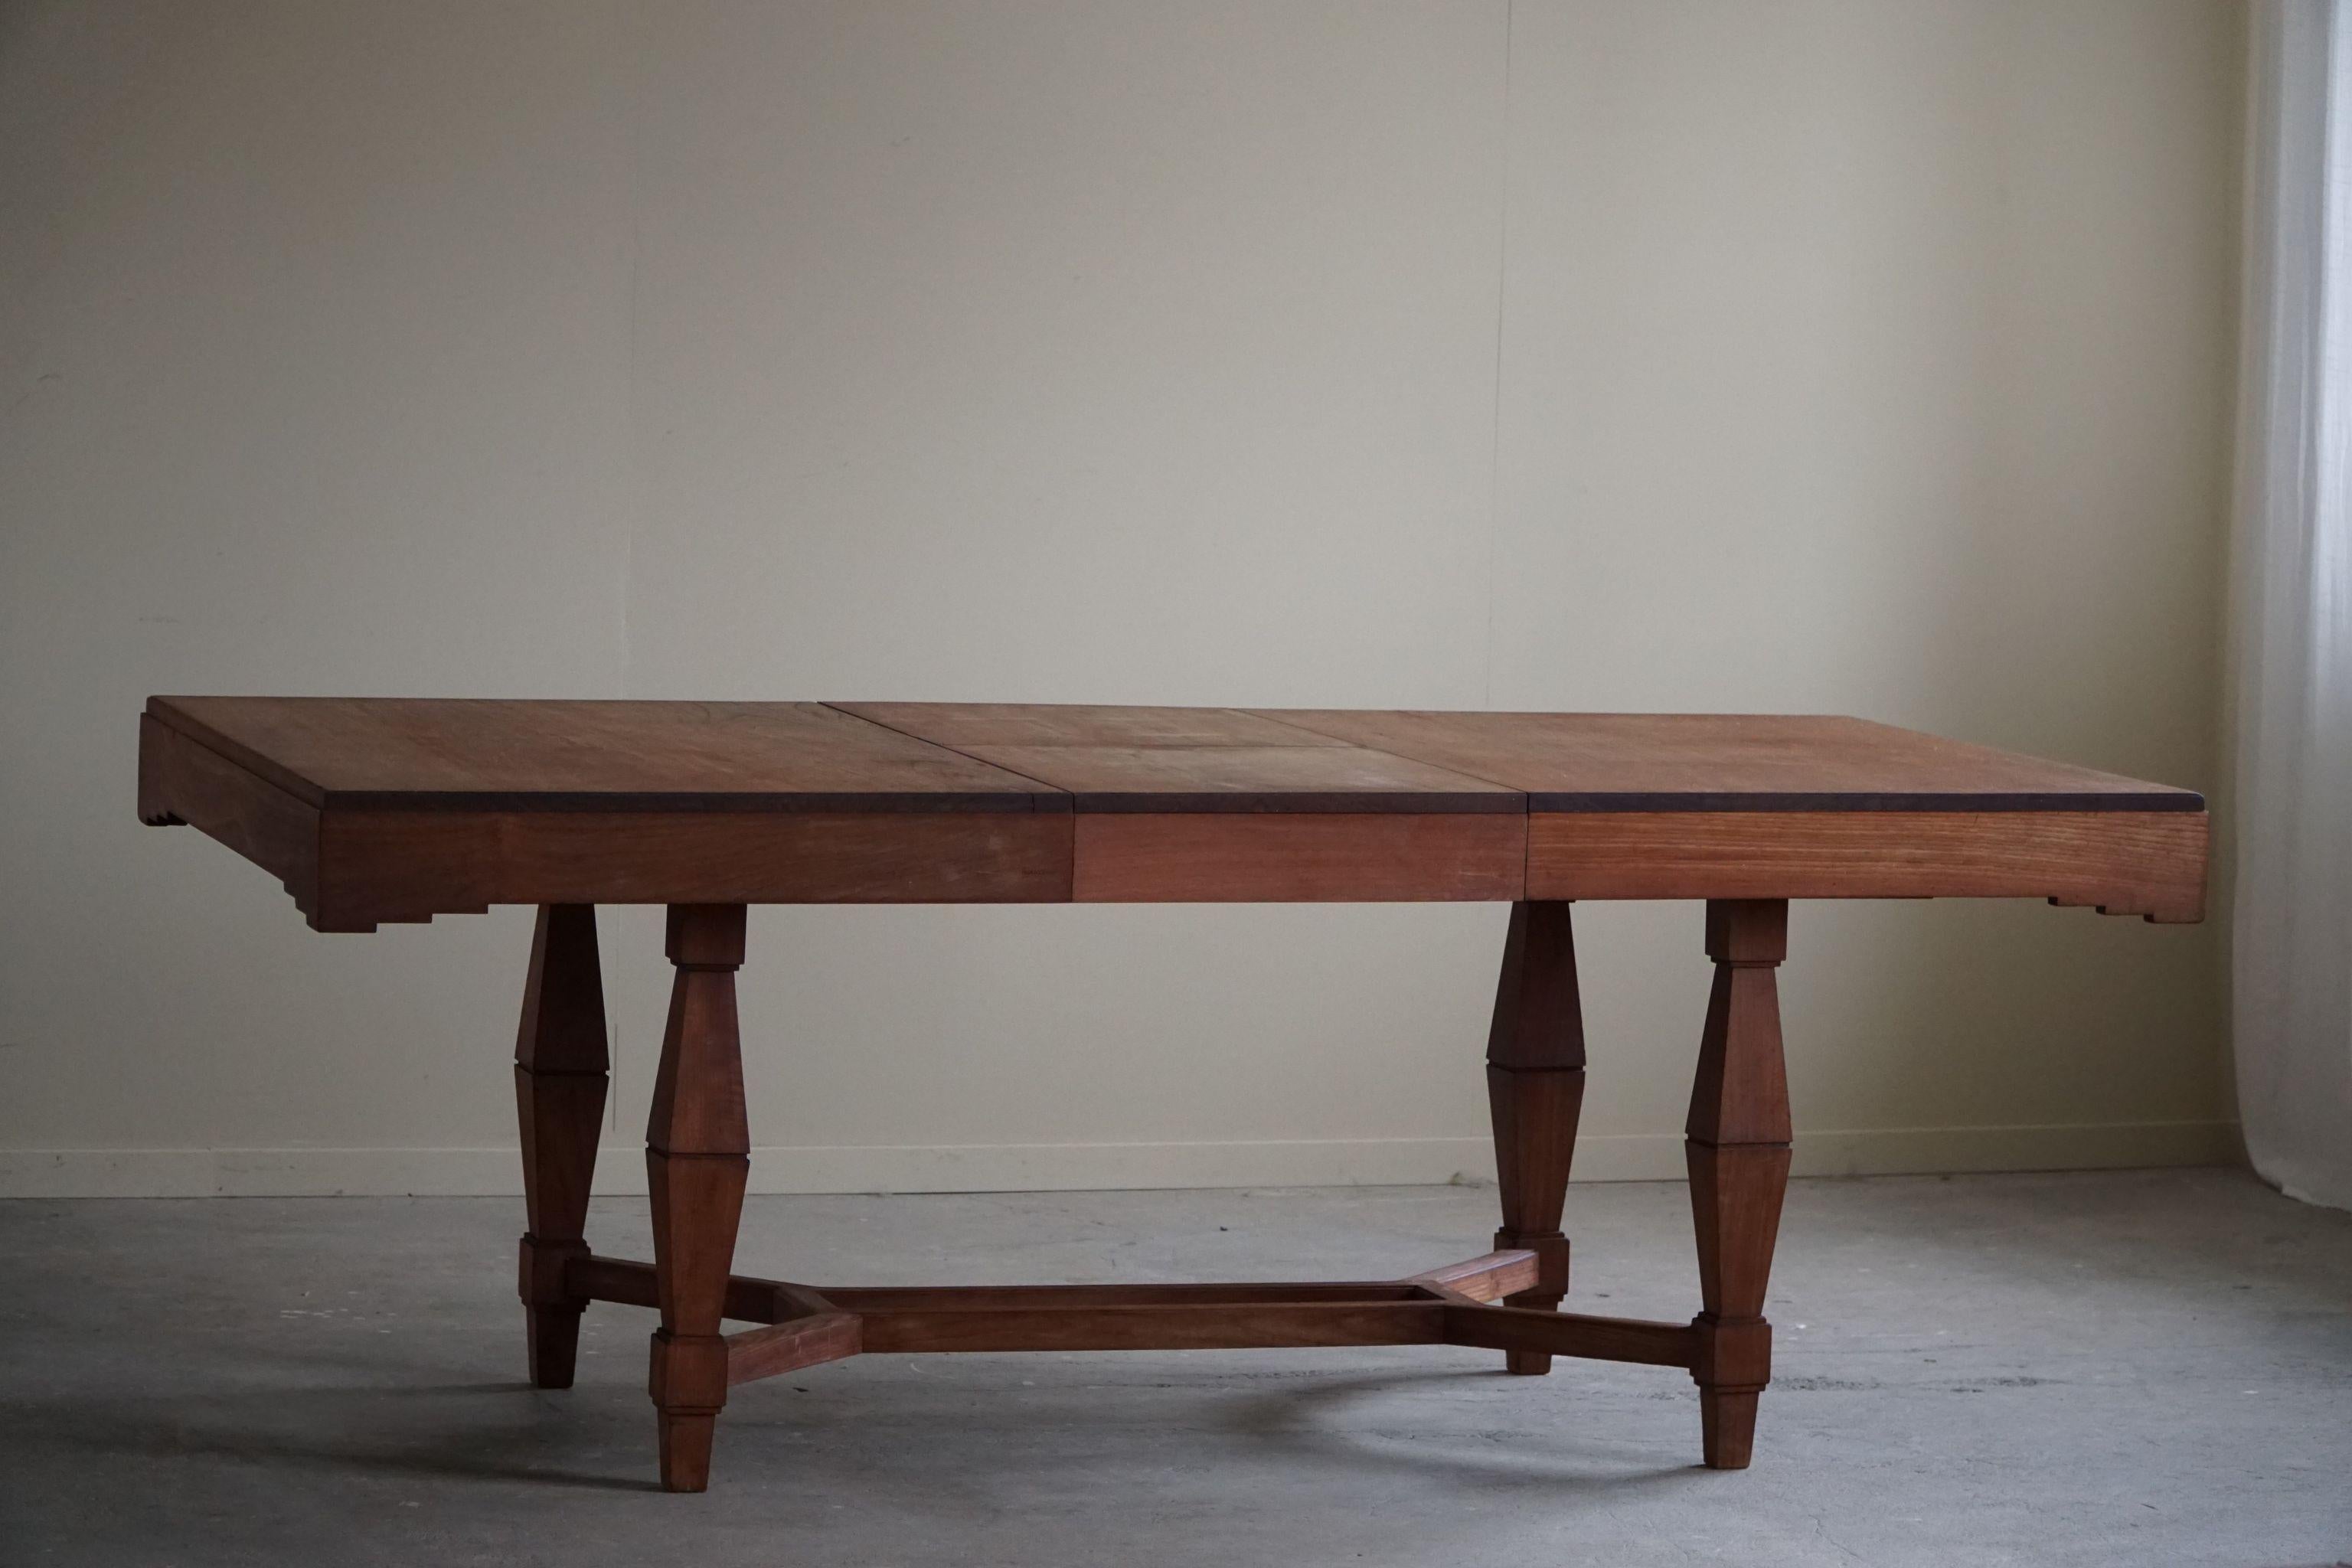 20th Century Art Deco Dining Table in Teak, with Butterfly Leaf, Danish Cabinetmaker, 1940s For Sale